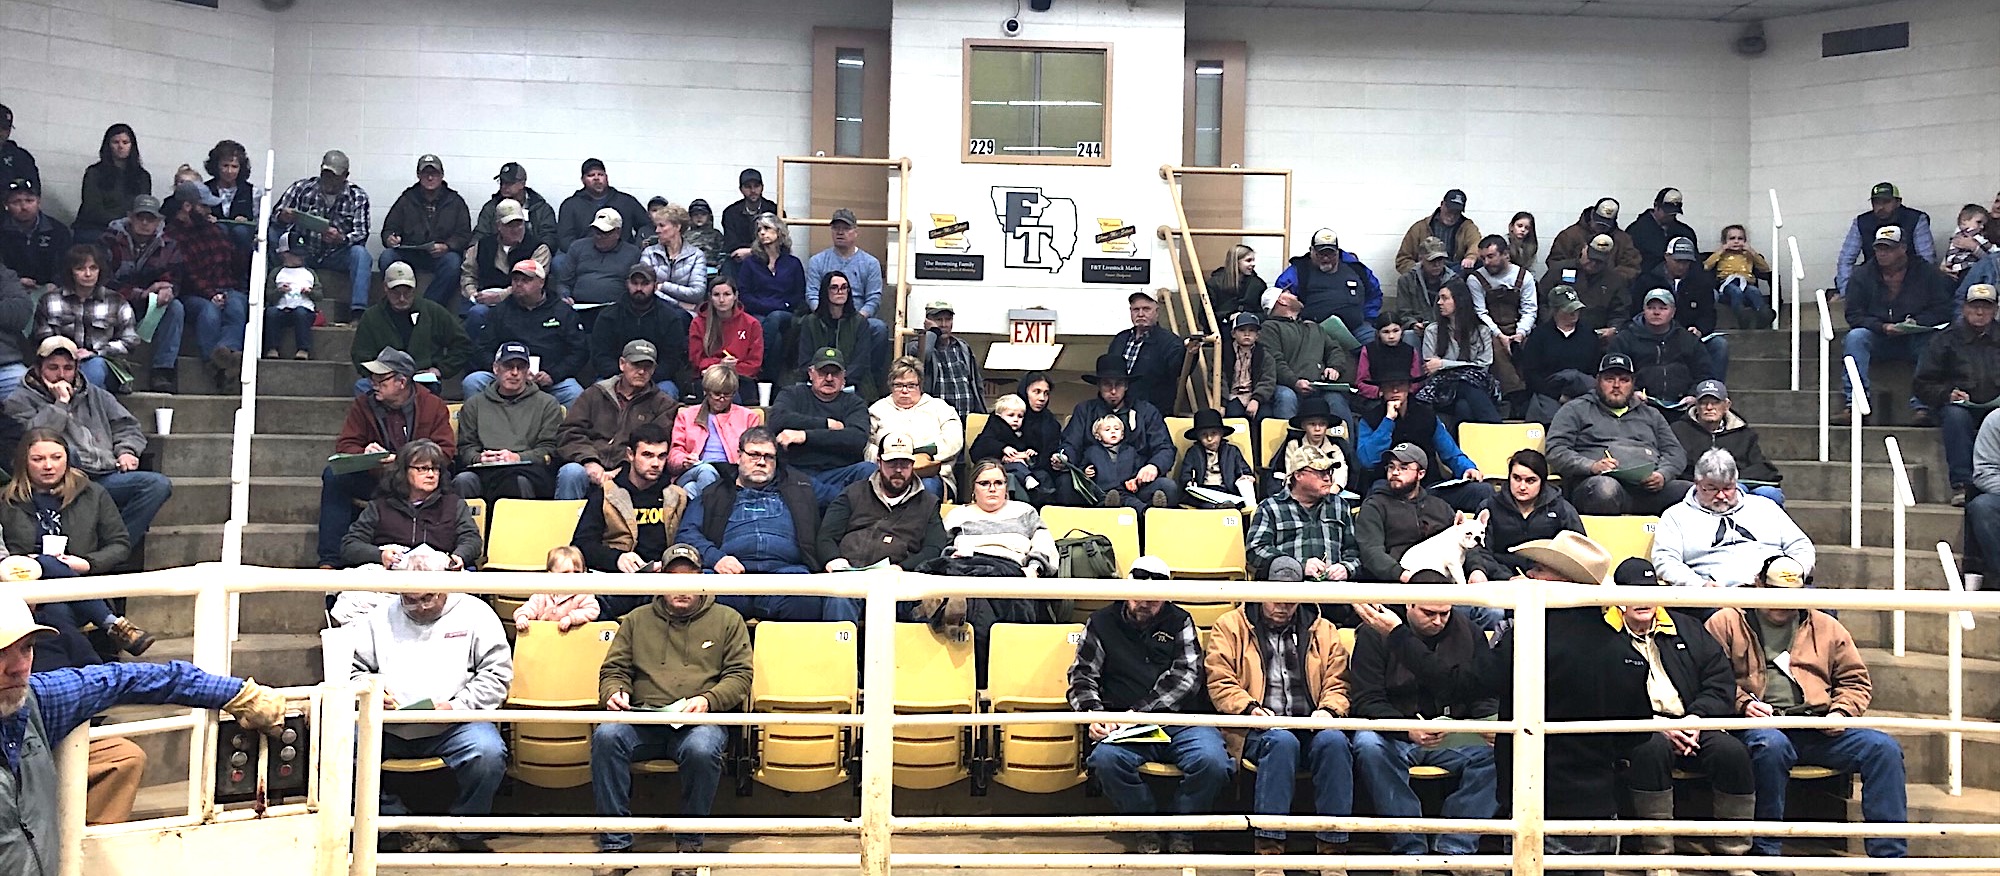 Open Interest in Show-Me-Select heifers was strong at 2022 sales. Sales totaled $682,050 in the final SMS sale of the year at F&T Livestock in Palmyra. Photo courtesy of Daniel Mallory.